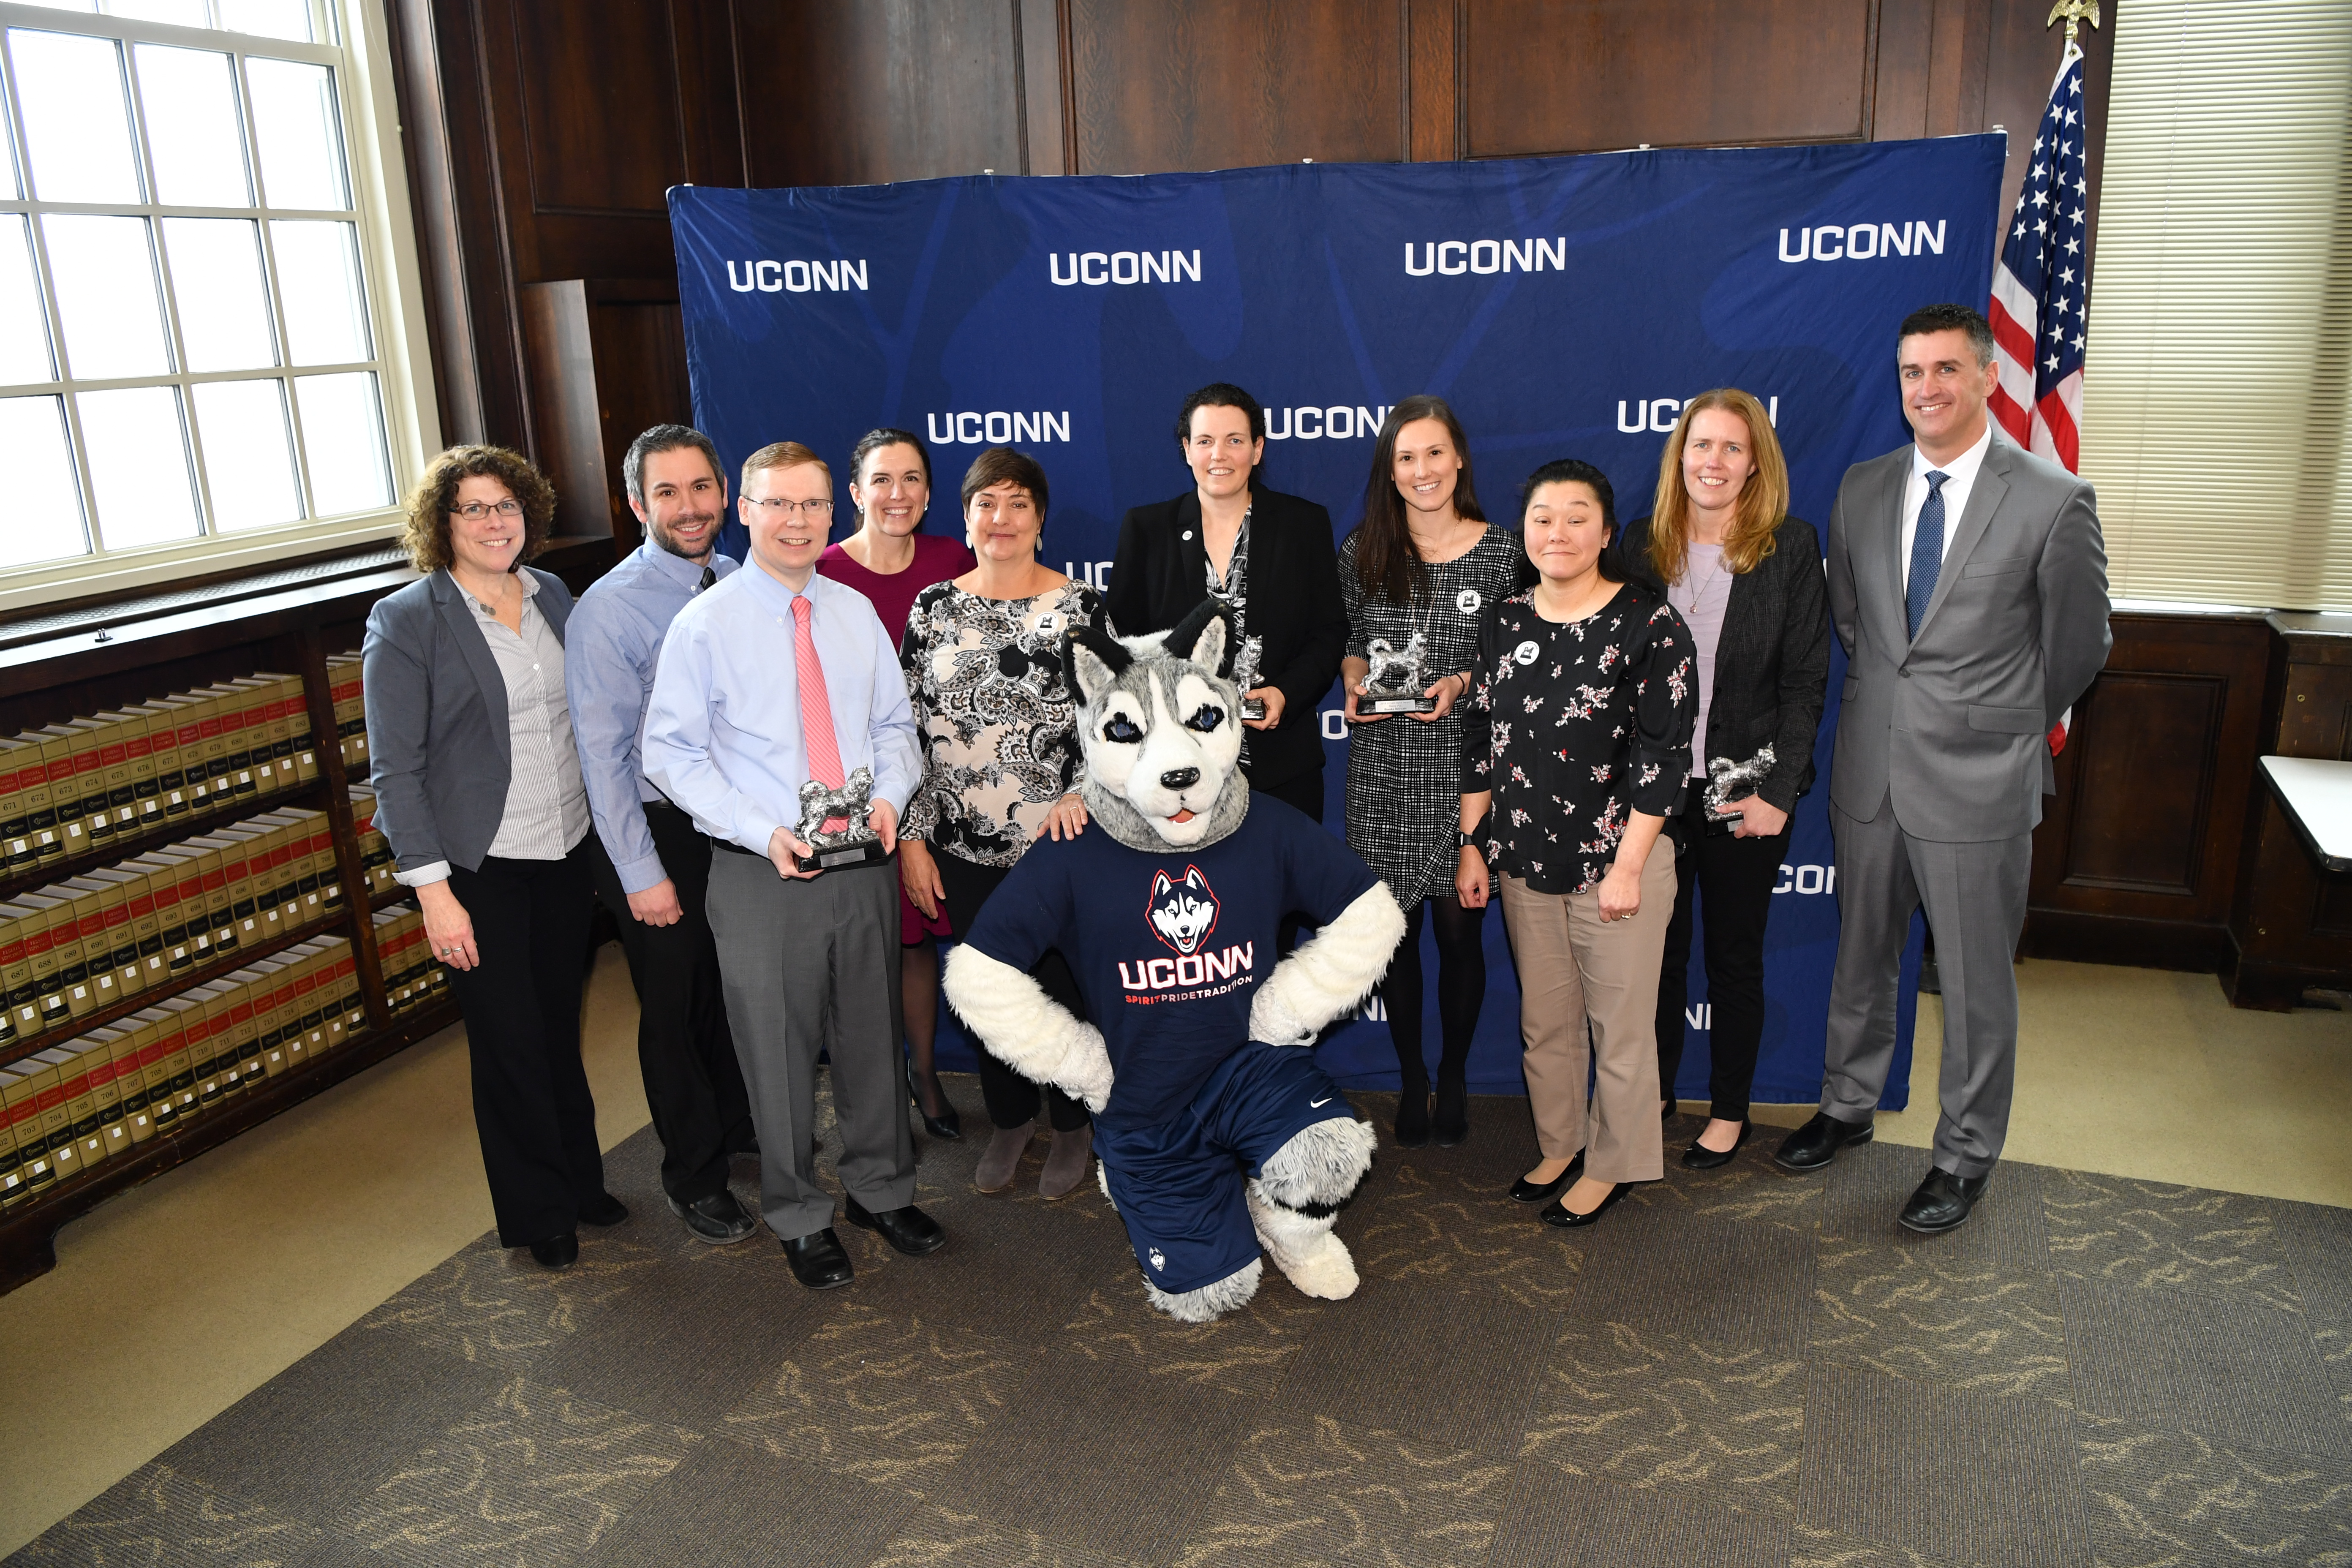 Winners of the 2018 Spirit Awards pose for a photo with Jonathan the Husky at Wilbur Cross, 2018. (Peter Morenus/UConn Photo)